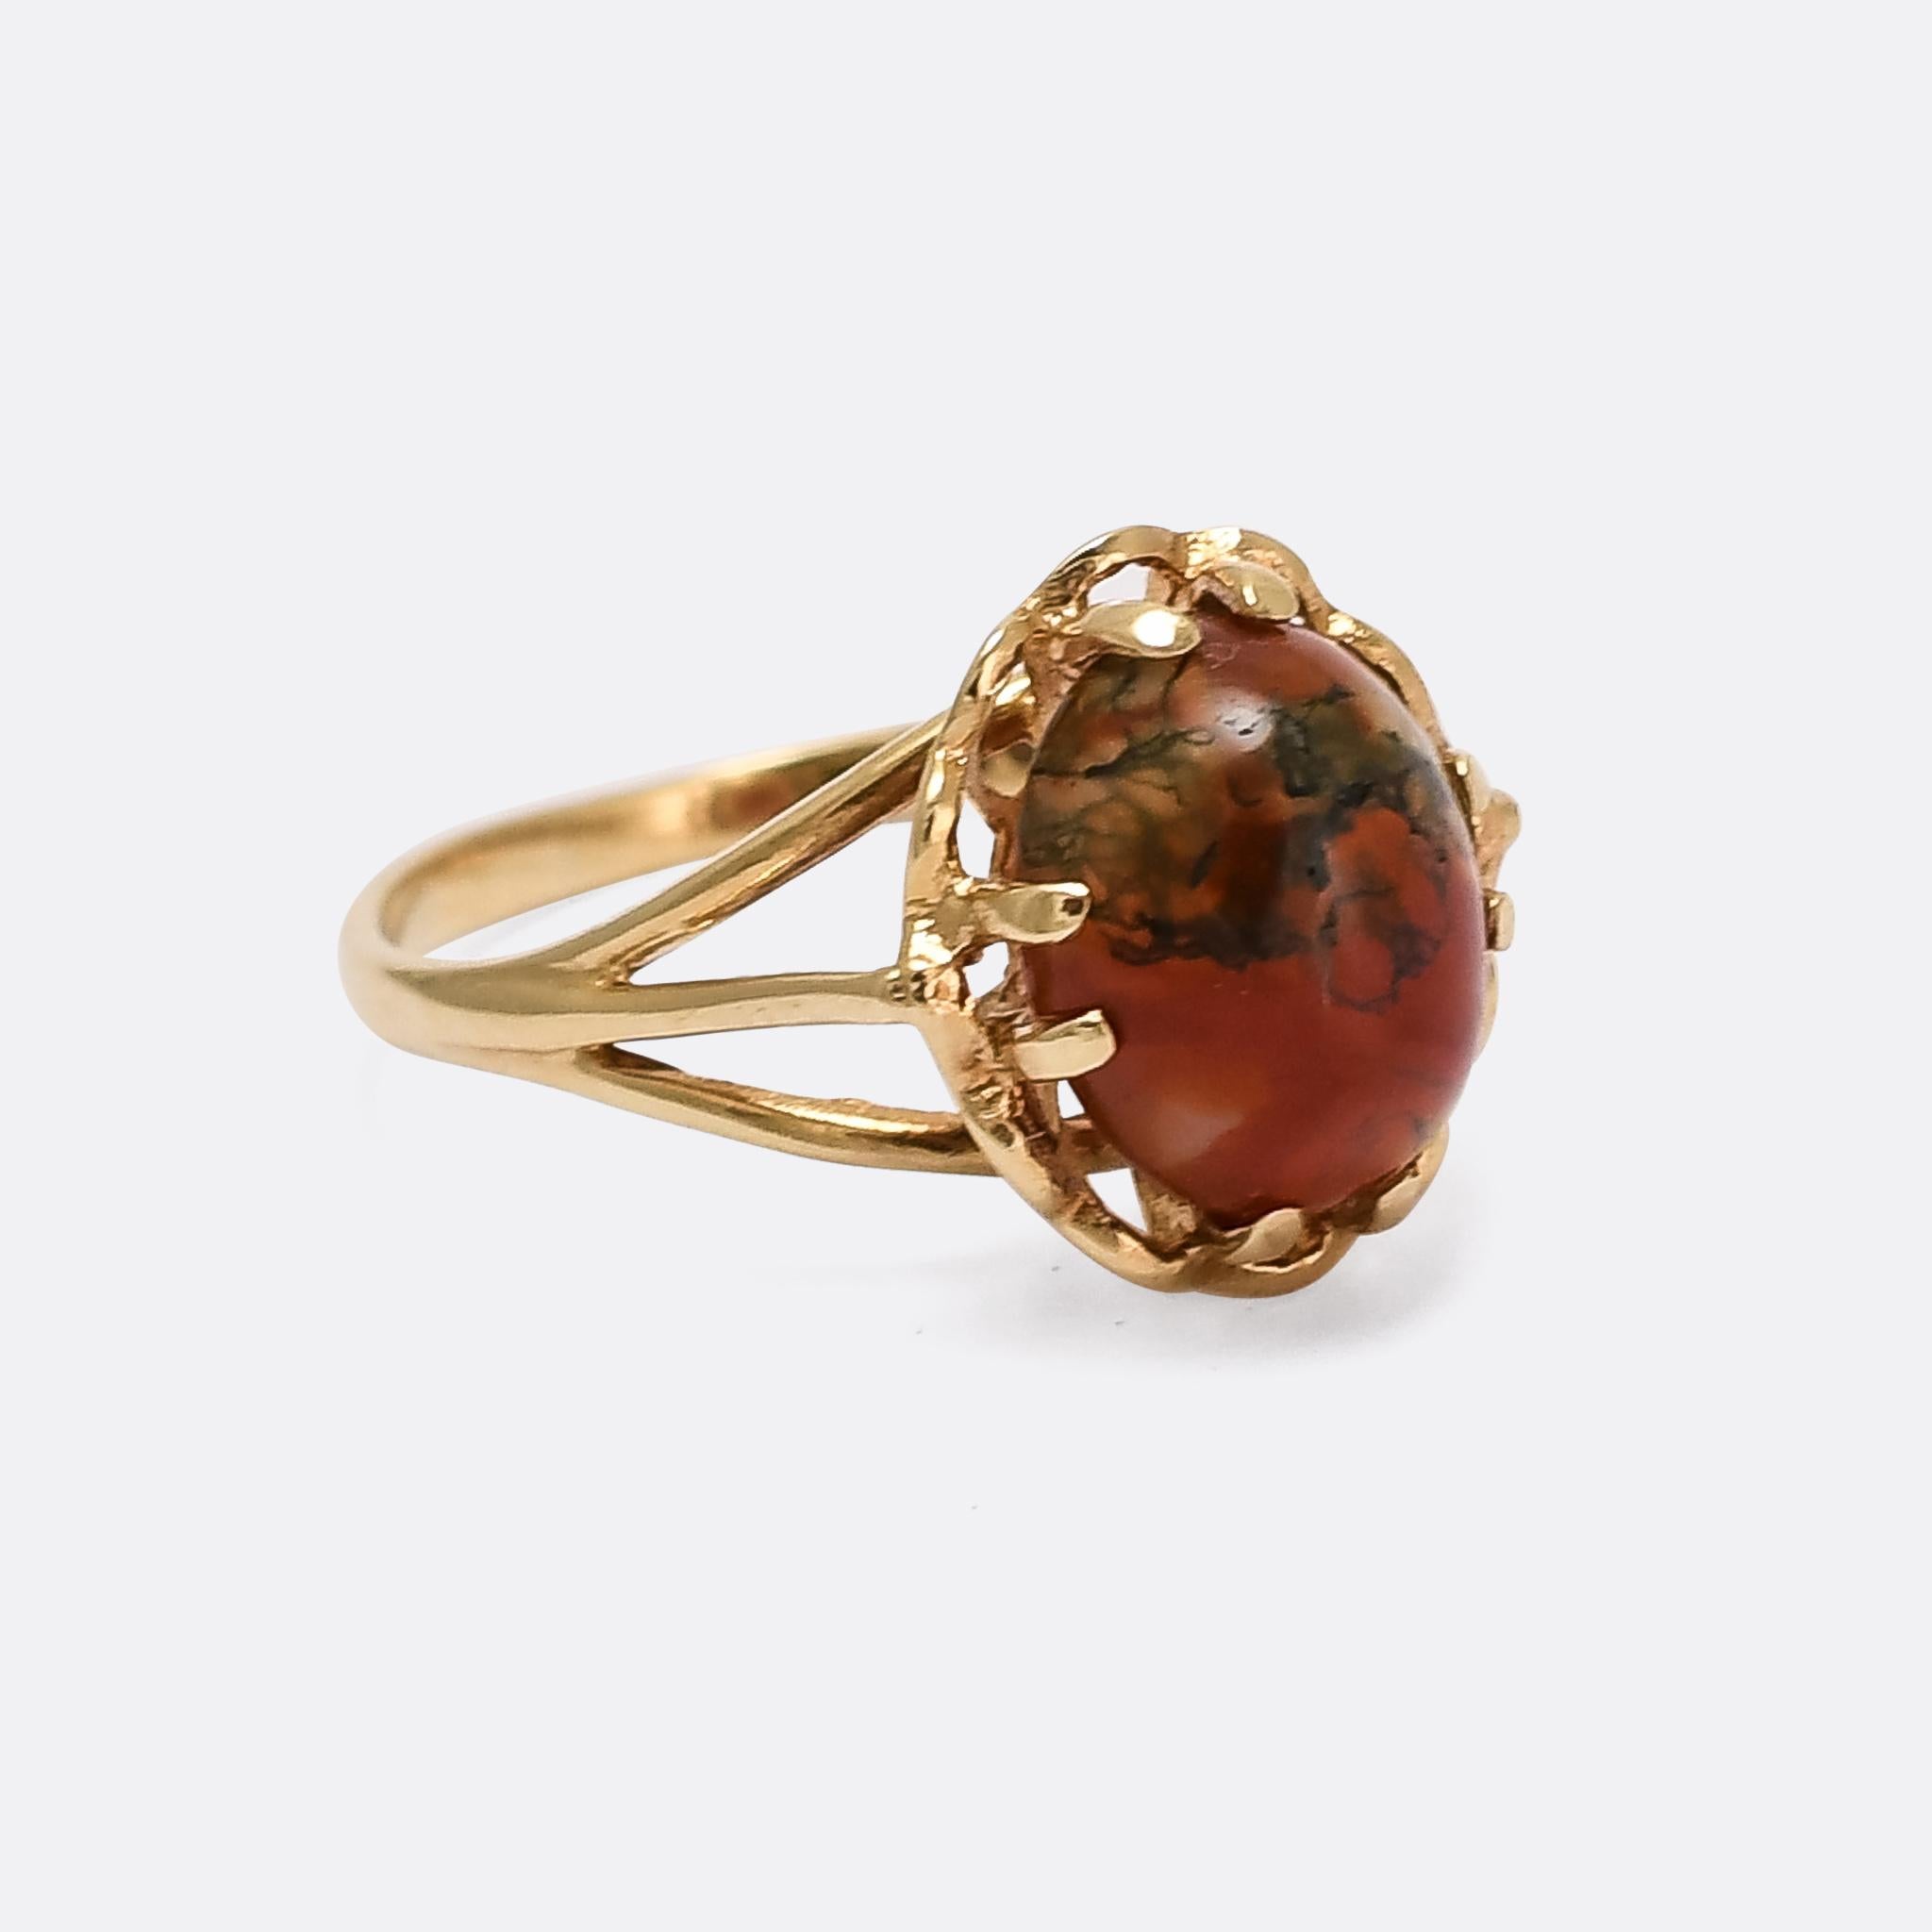 A striking vintage single-stone ring set with a red moss agate cabochon. The stone rests in an eight-claw mount with an openworked flower petal design behind, and elegant trifurcated shoulders. It's modelled in 9 karat gold with clear Birmingham